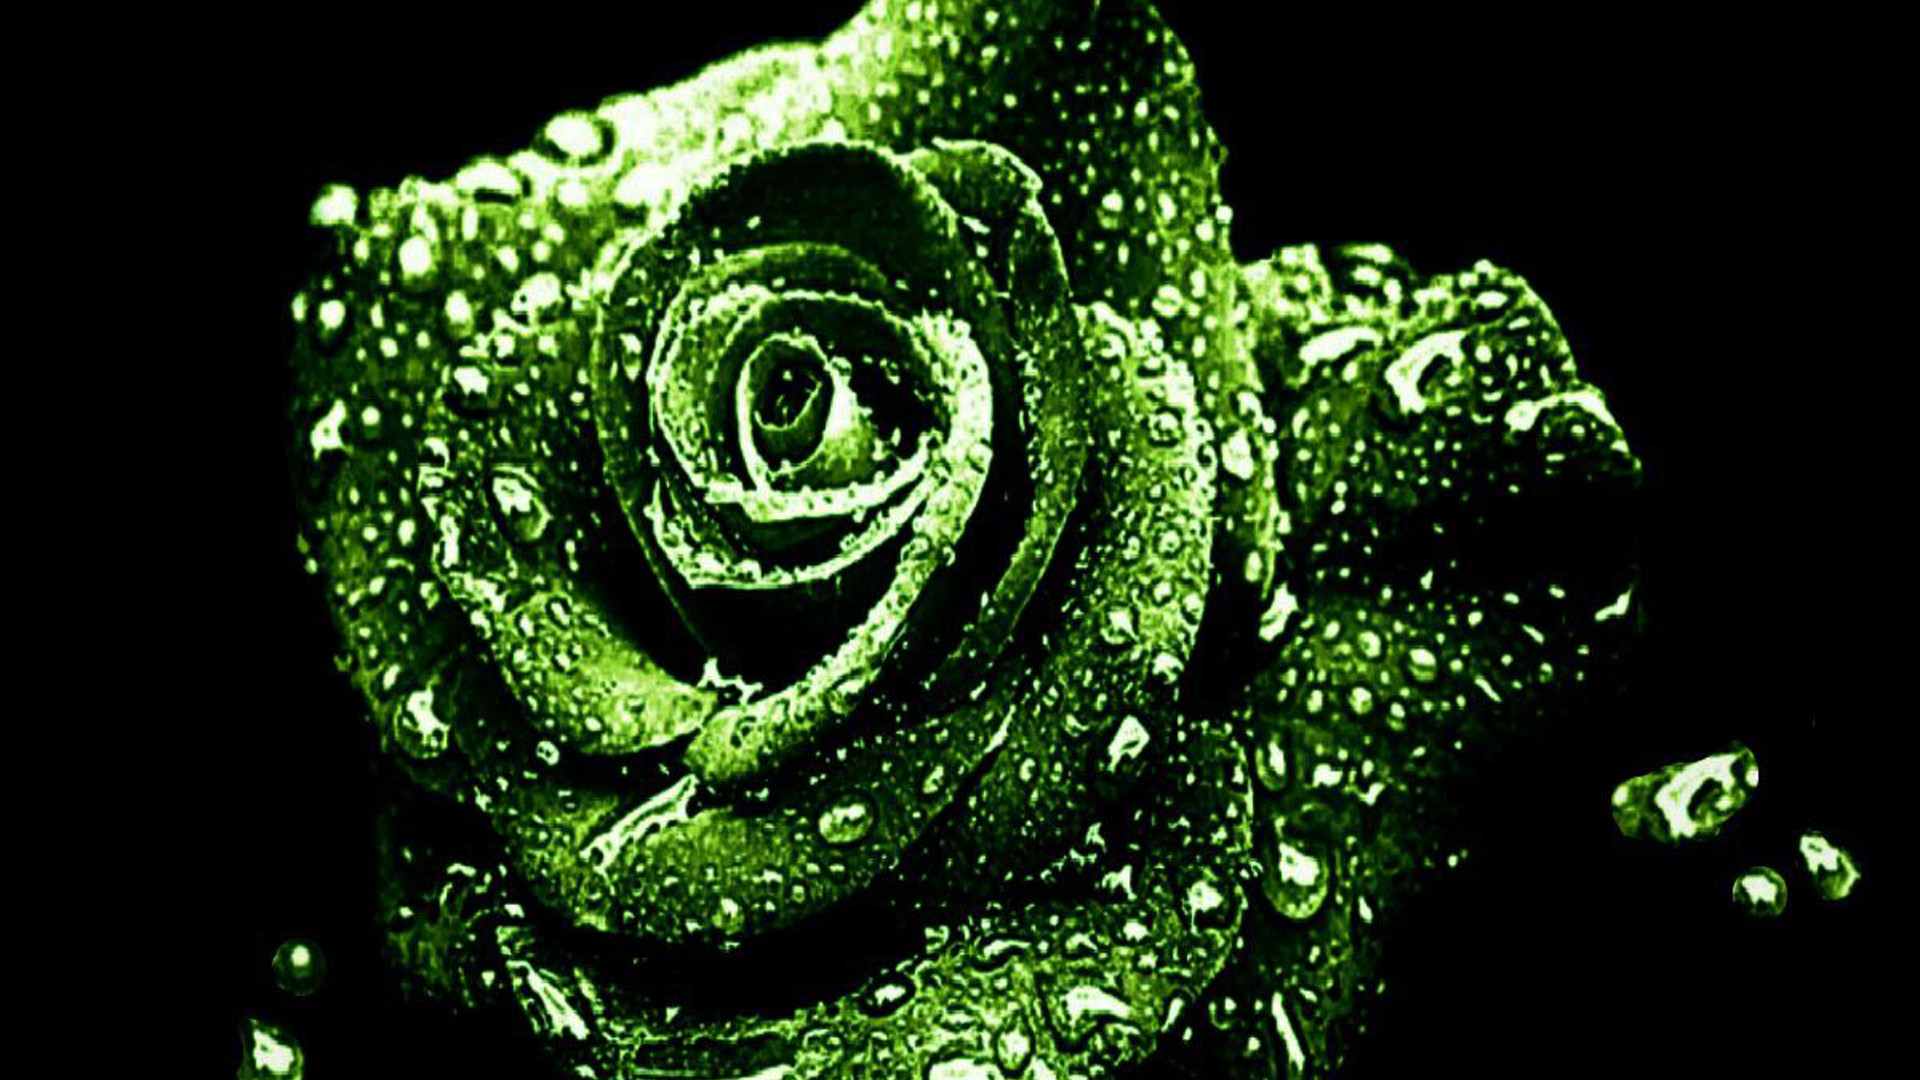 1920x1080 Dark Green Roses Wallpapers, Rose Flower Images, Rose Pictures An...